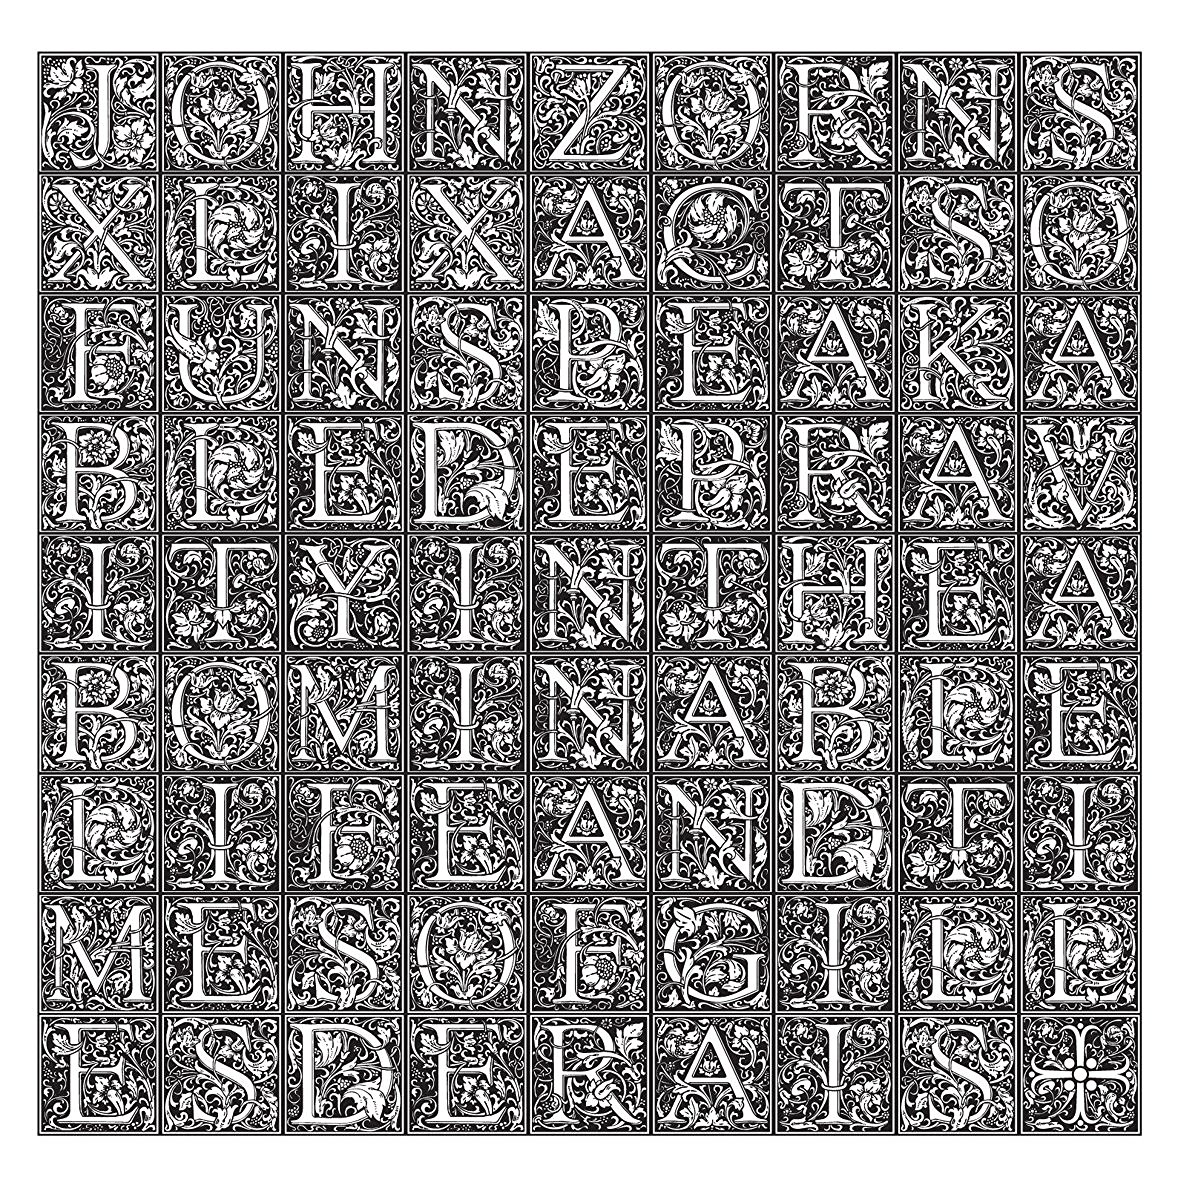 JOHN ZORN'S SIMULACRUM - 49 Acts Of Unspeakable Depravity In The Abominable Life And Times Of Gilles De Rais cover 